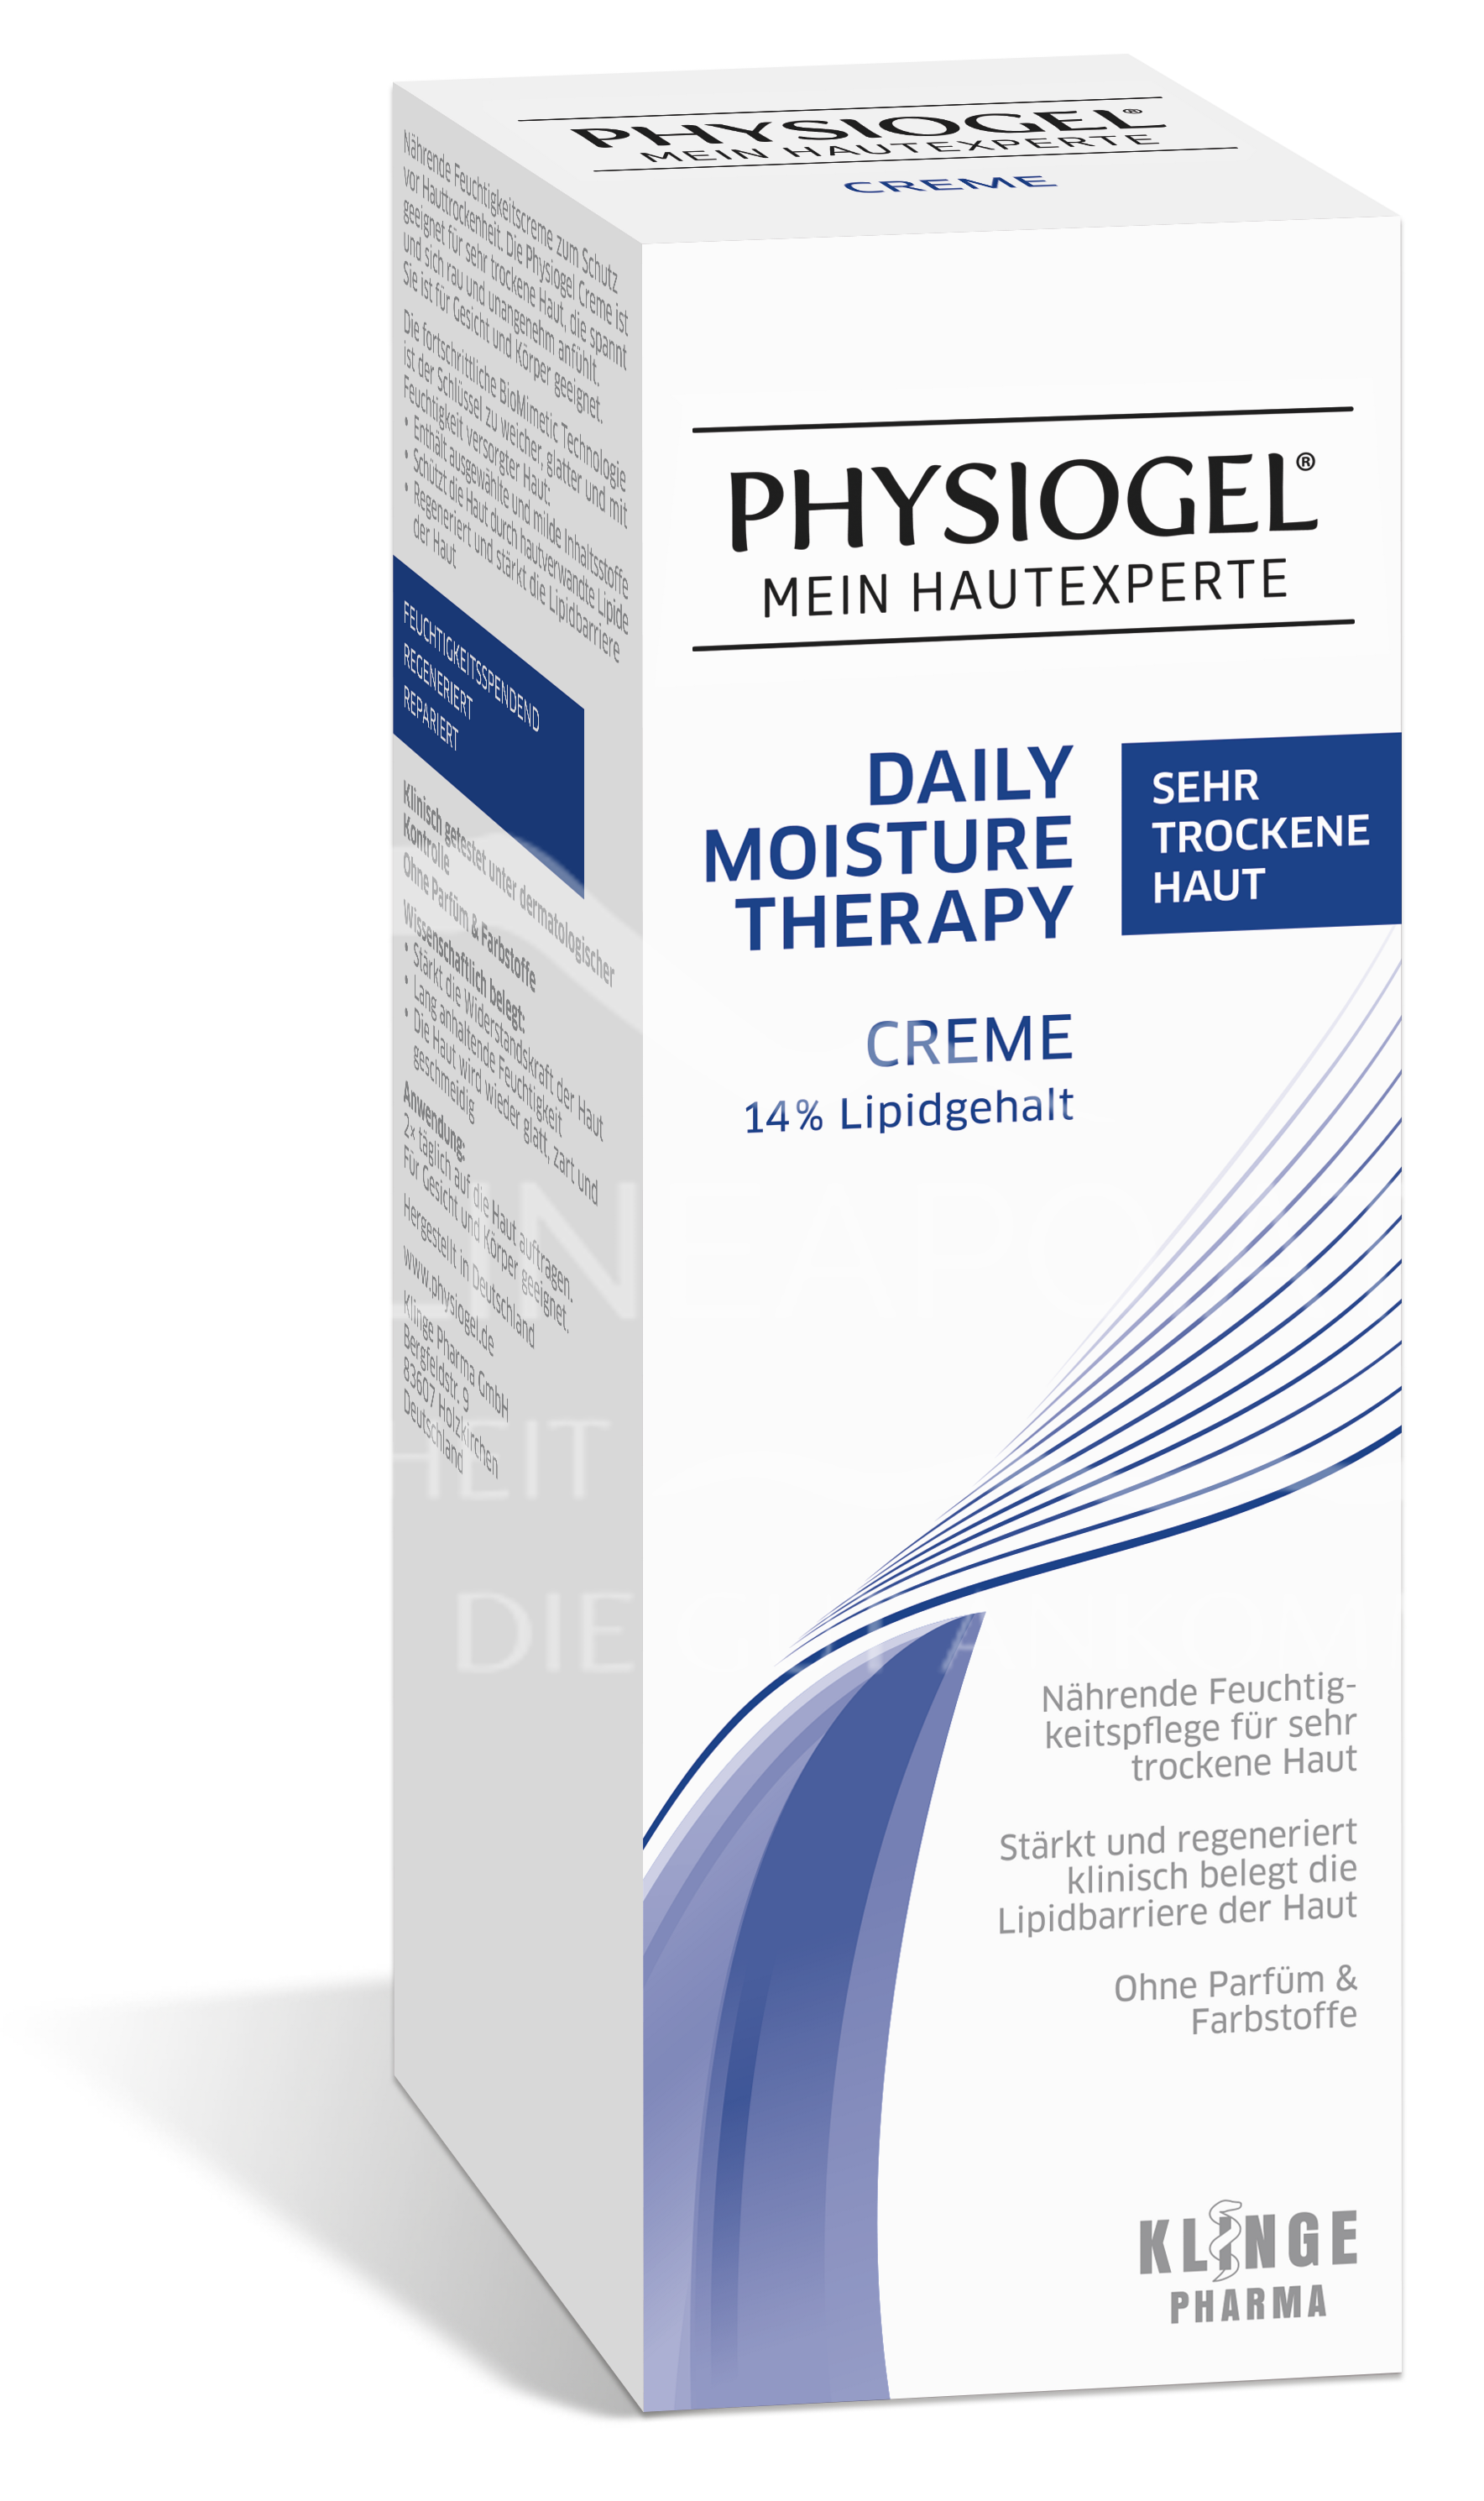 Physiogel® Daily Moisture Therapy Creme - Sehr trockene Haut